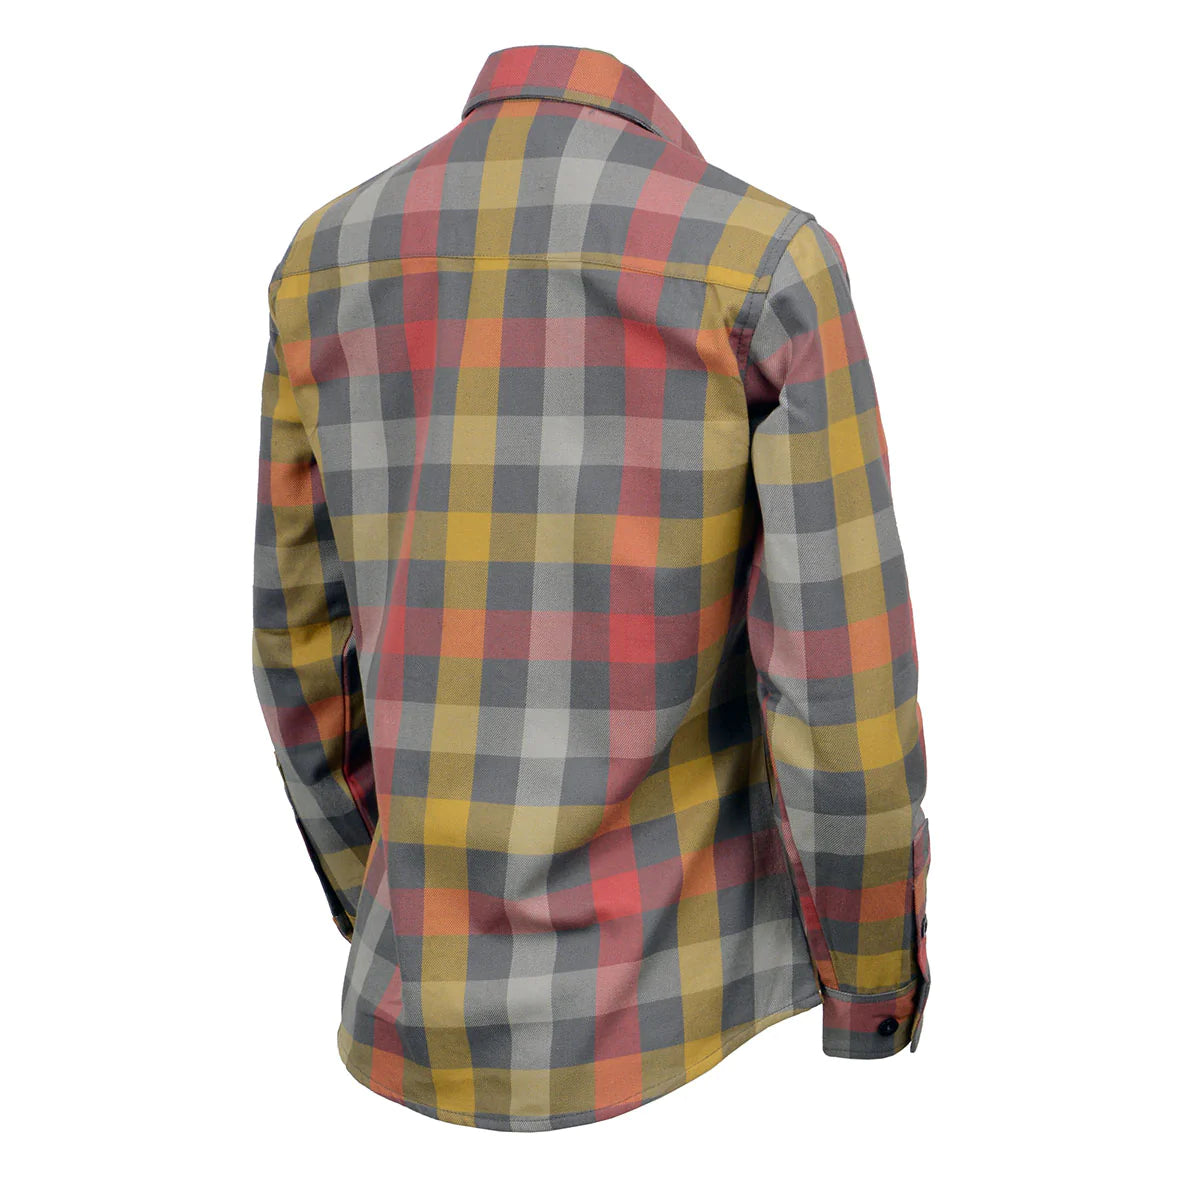 Women's Gray and Red with Yellow Long Sleeve Cotton Flannel Shirt